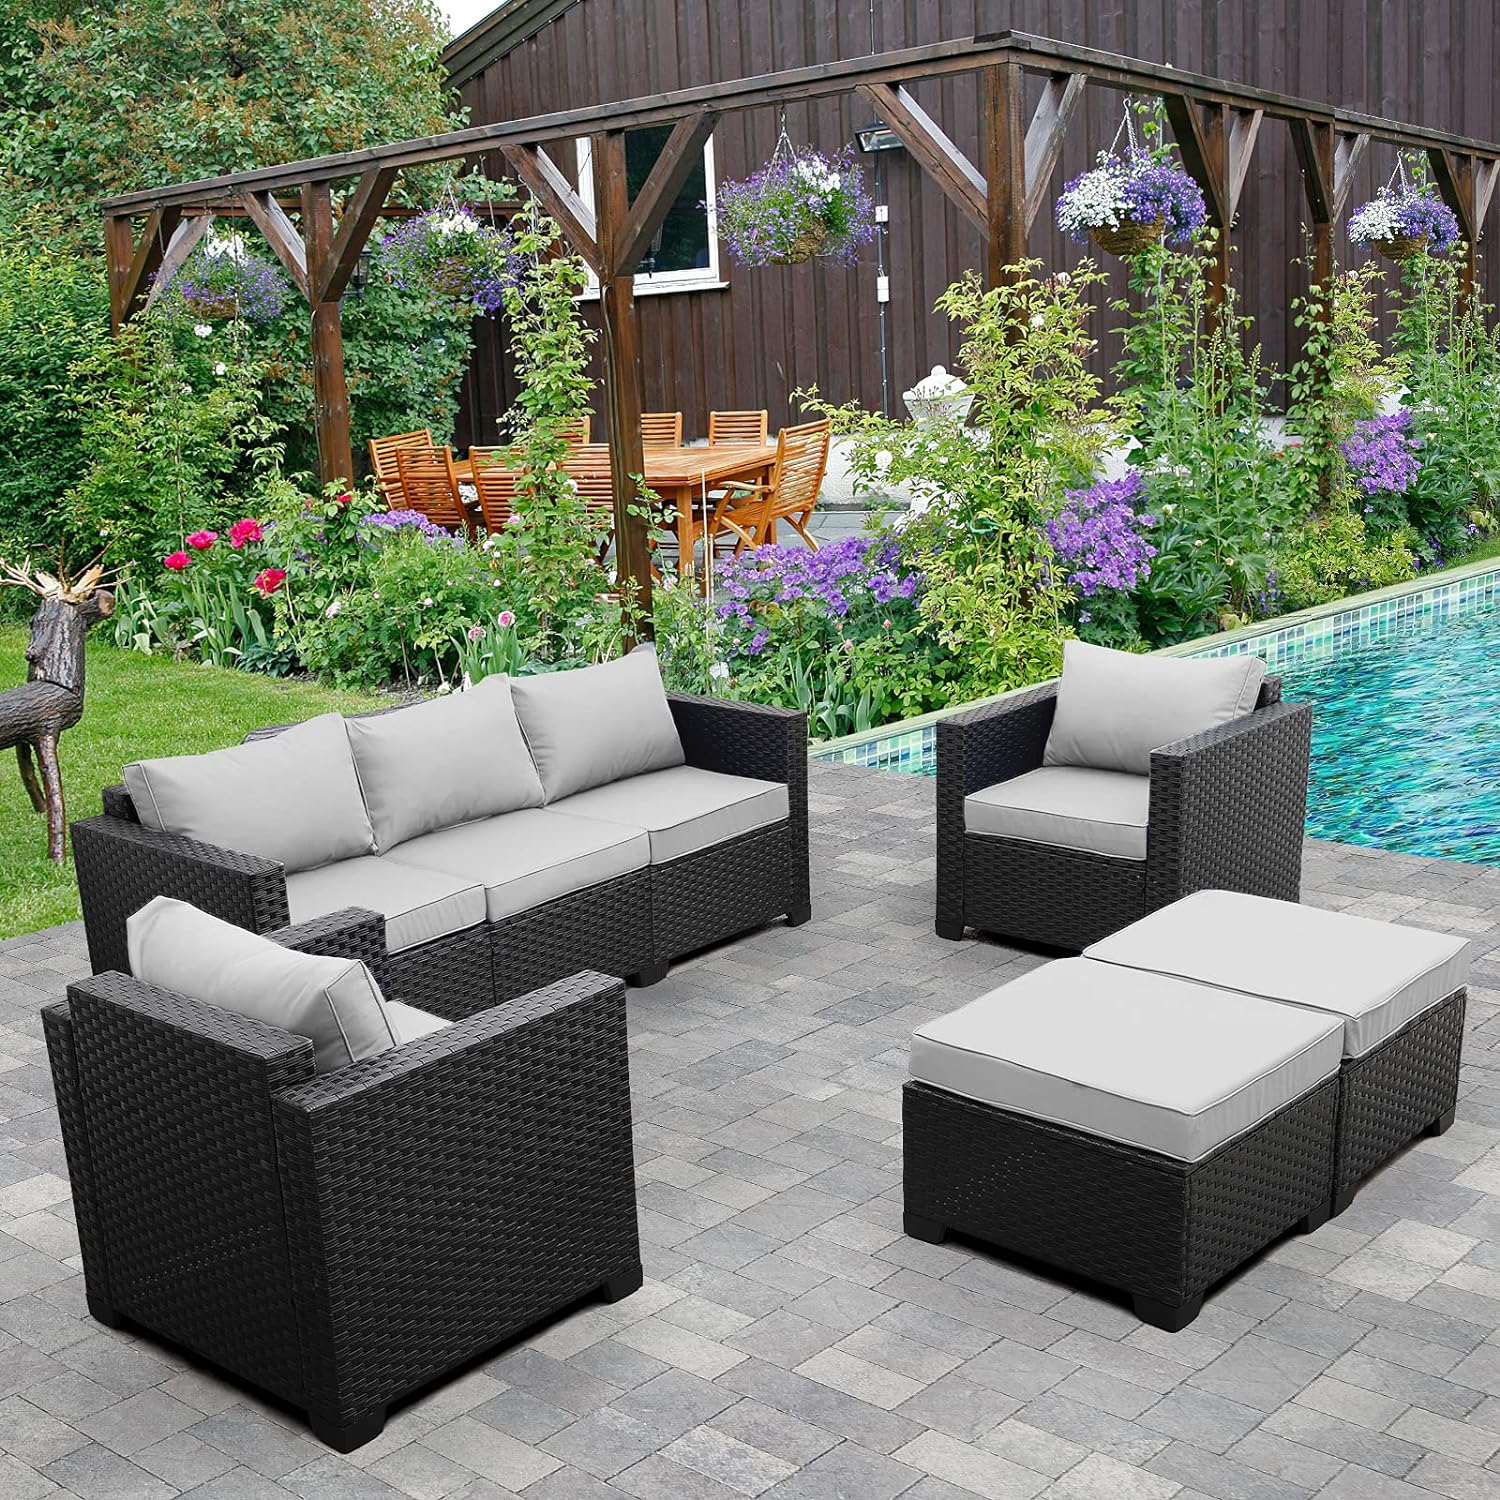 Rattaner Outdoor Wicker Furniture Couch Set 5 Pieces Patio Furniture Sectional Sofa with Grey No-Slip Cushions and Waterproof Covers